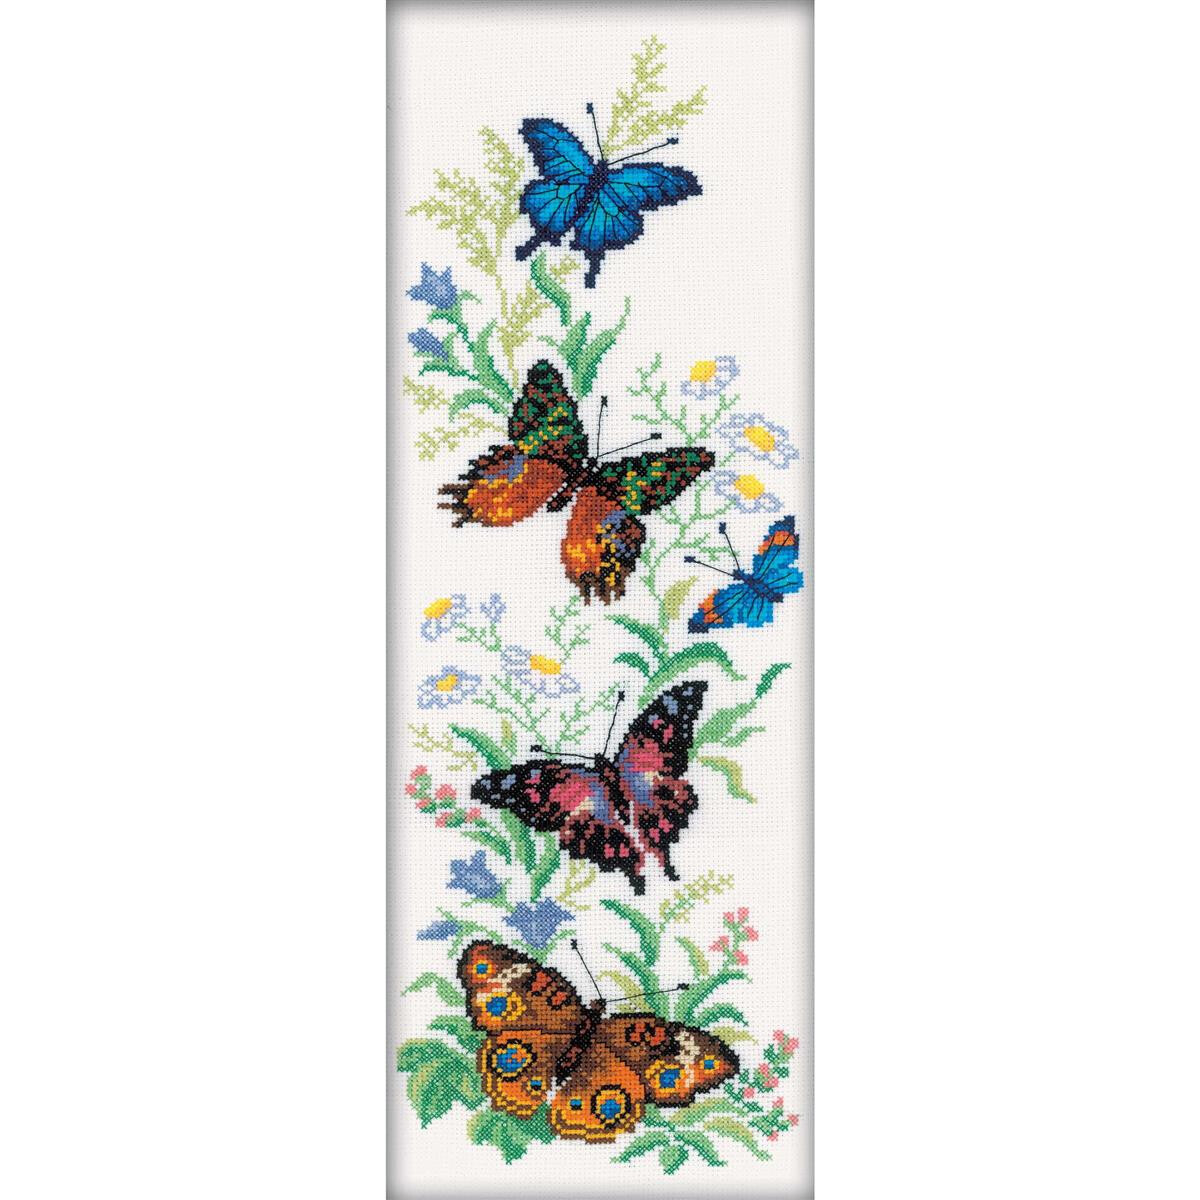 RTO counted Cross Stitch Kit "Flying...